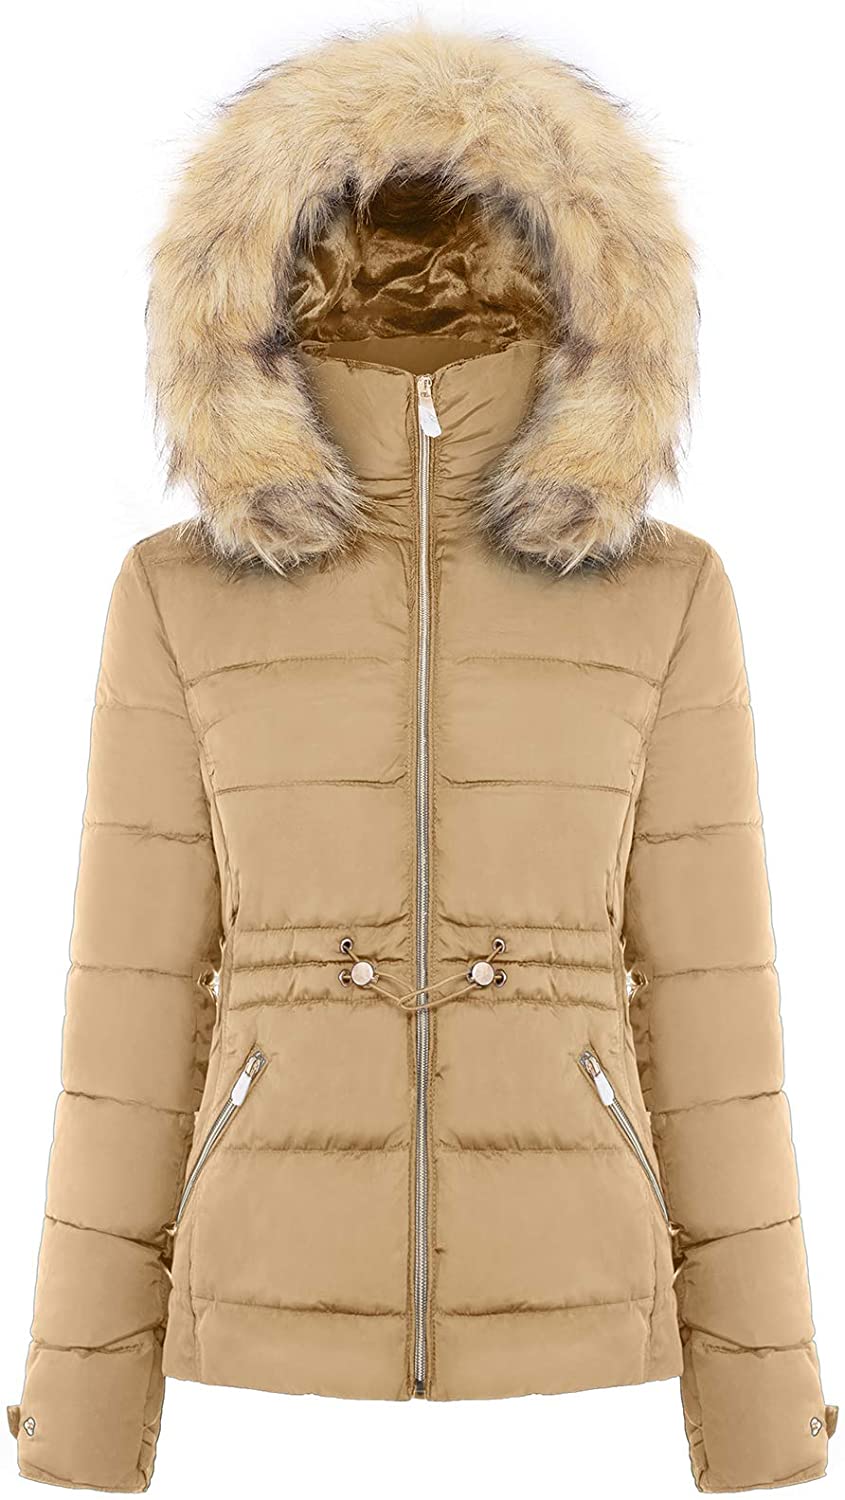 Faux Fur Winter Puffer Removable eBay with Coat | BodiLove Jacket Women\'s Short Quilted